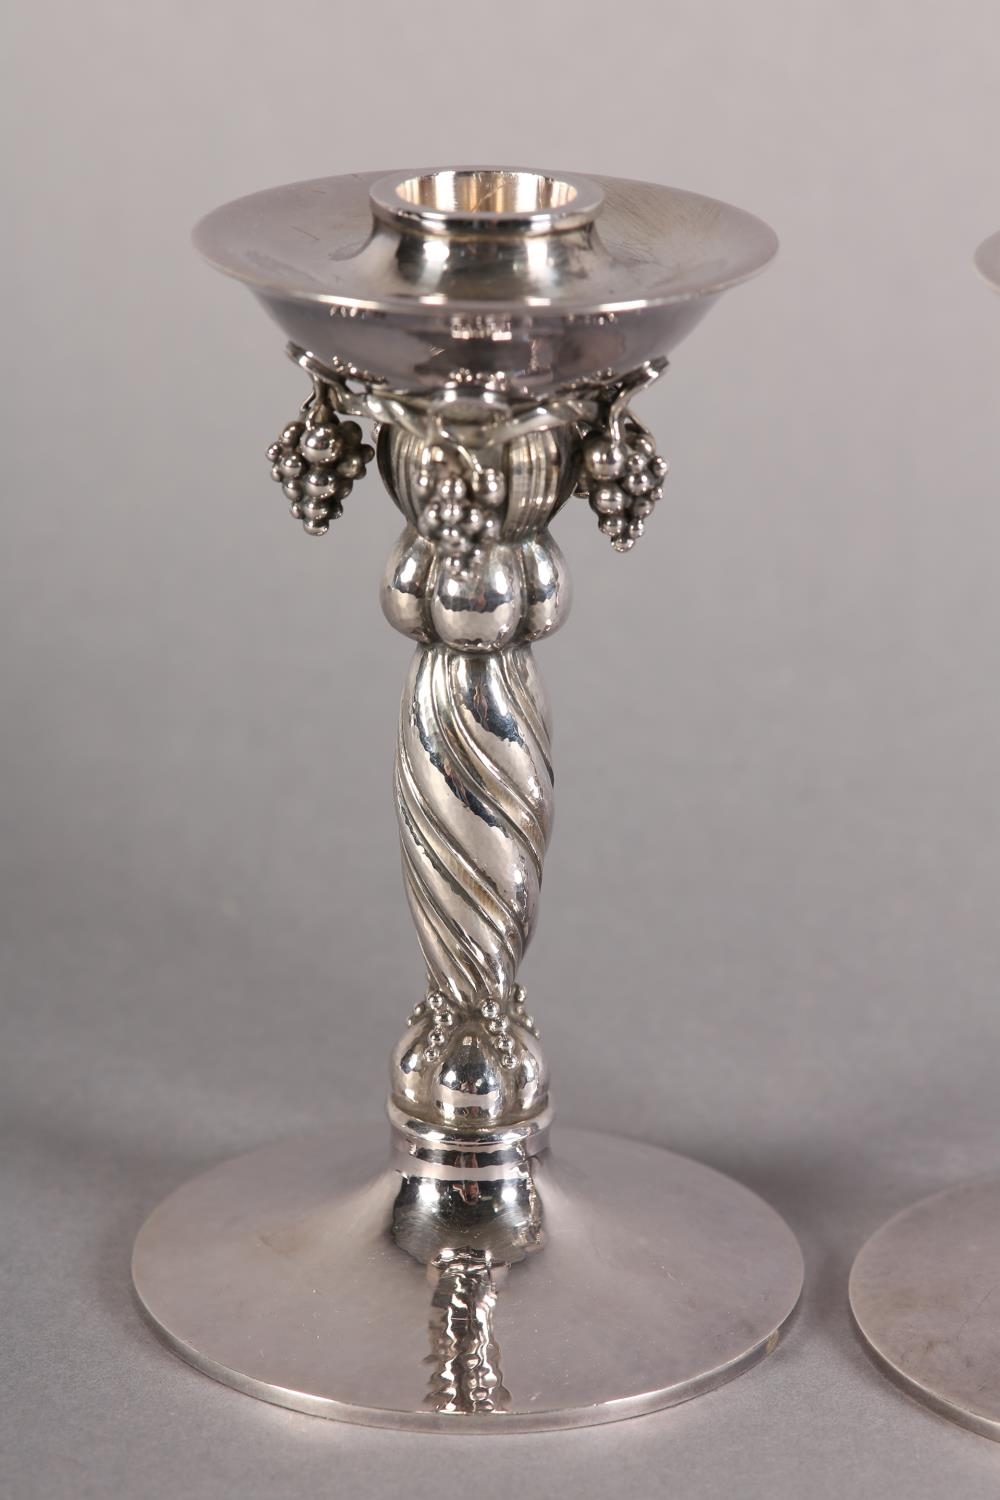 A PAIR OF GEORG JENSEN SILVER GRAPEVINE CANDLESTICKS No. 263A both signed Y10 9255 Denmark Georg - Image 2 of 8